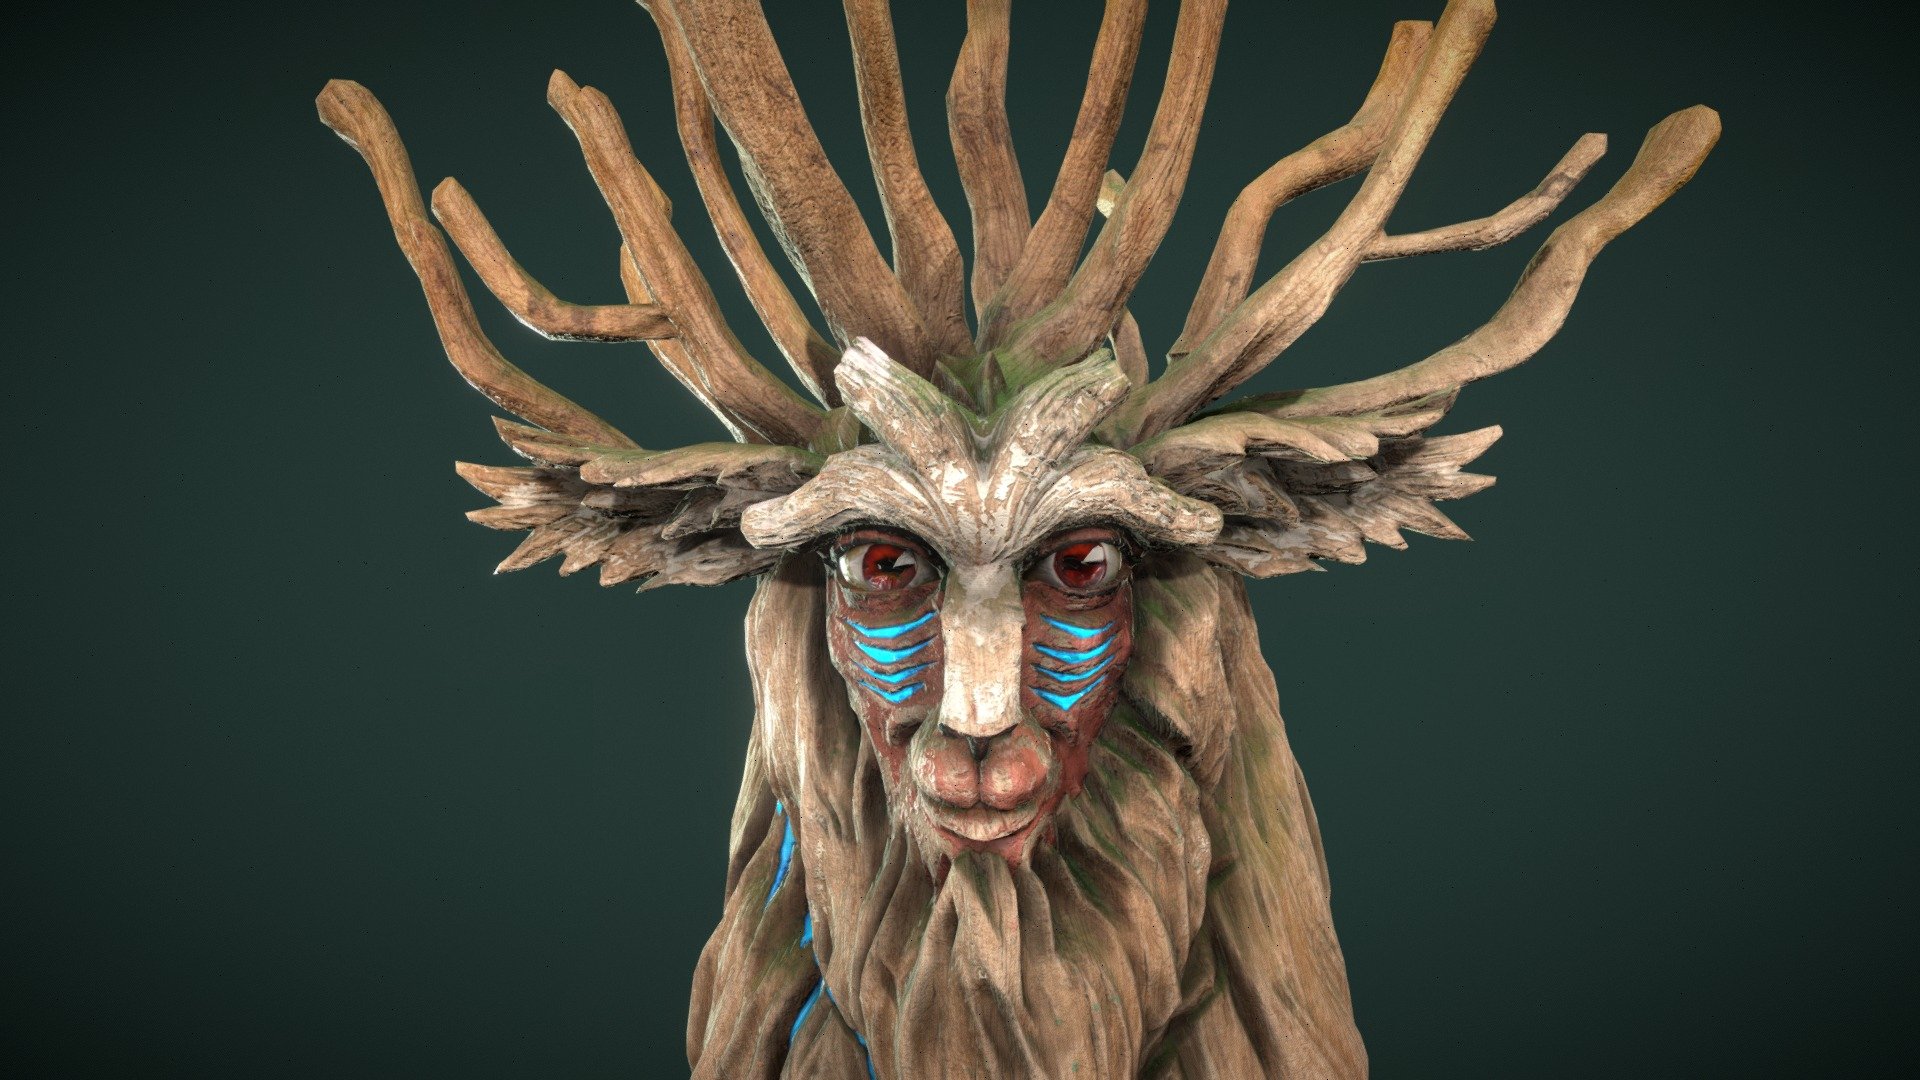 Princess Mononoke's Forest Spirit.

3D bust started with Nomad Sculpt and contiued in Zbrush. Then, I texturized the bust in Substance Painter to get an old handmade wooden look &amp; feel, with damage painting and moss, like a forgoten totem, idol, god figure. Also, I love the combination of blue epoxy resin with wood!
Hope you like! I enjoyed so much playing with Painter! - Forest Spirit - 3D model by Elena Valero (@elenavalero) 3d model